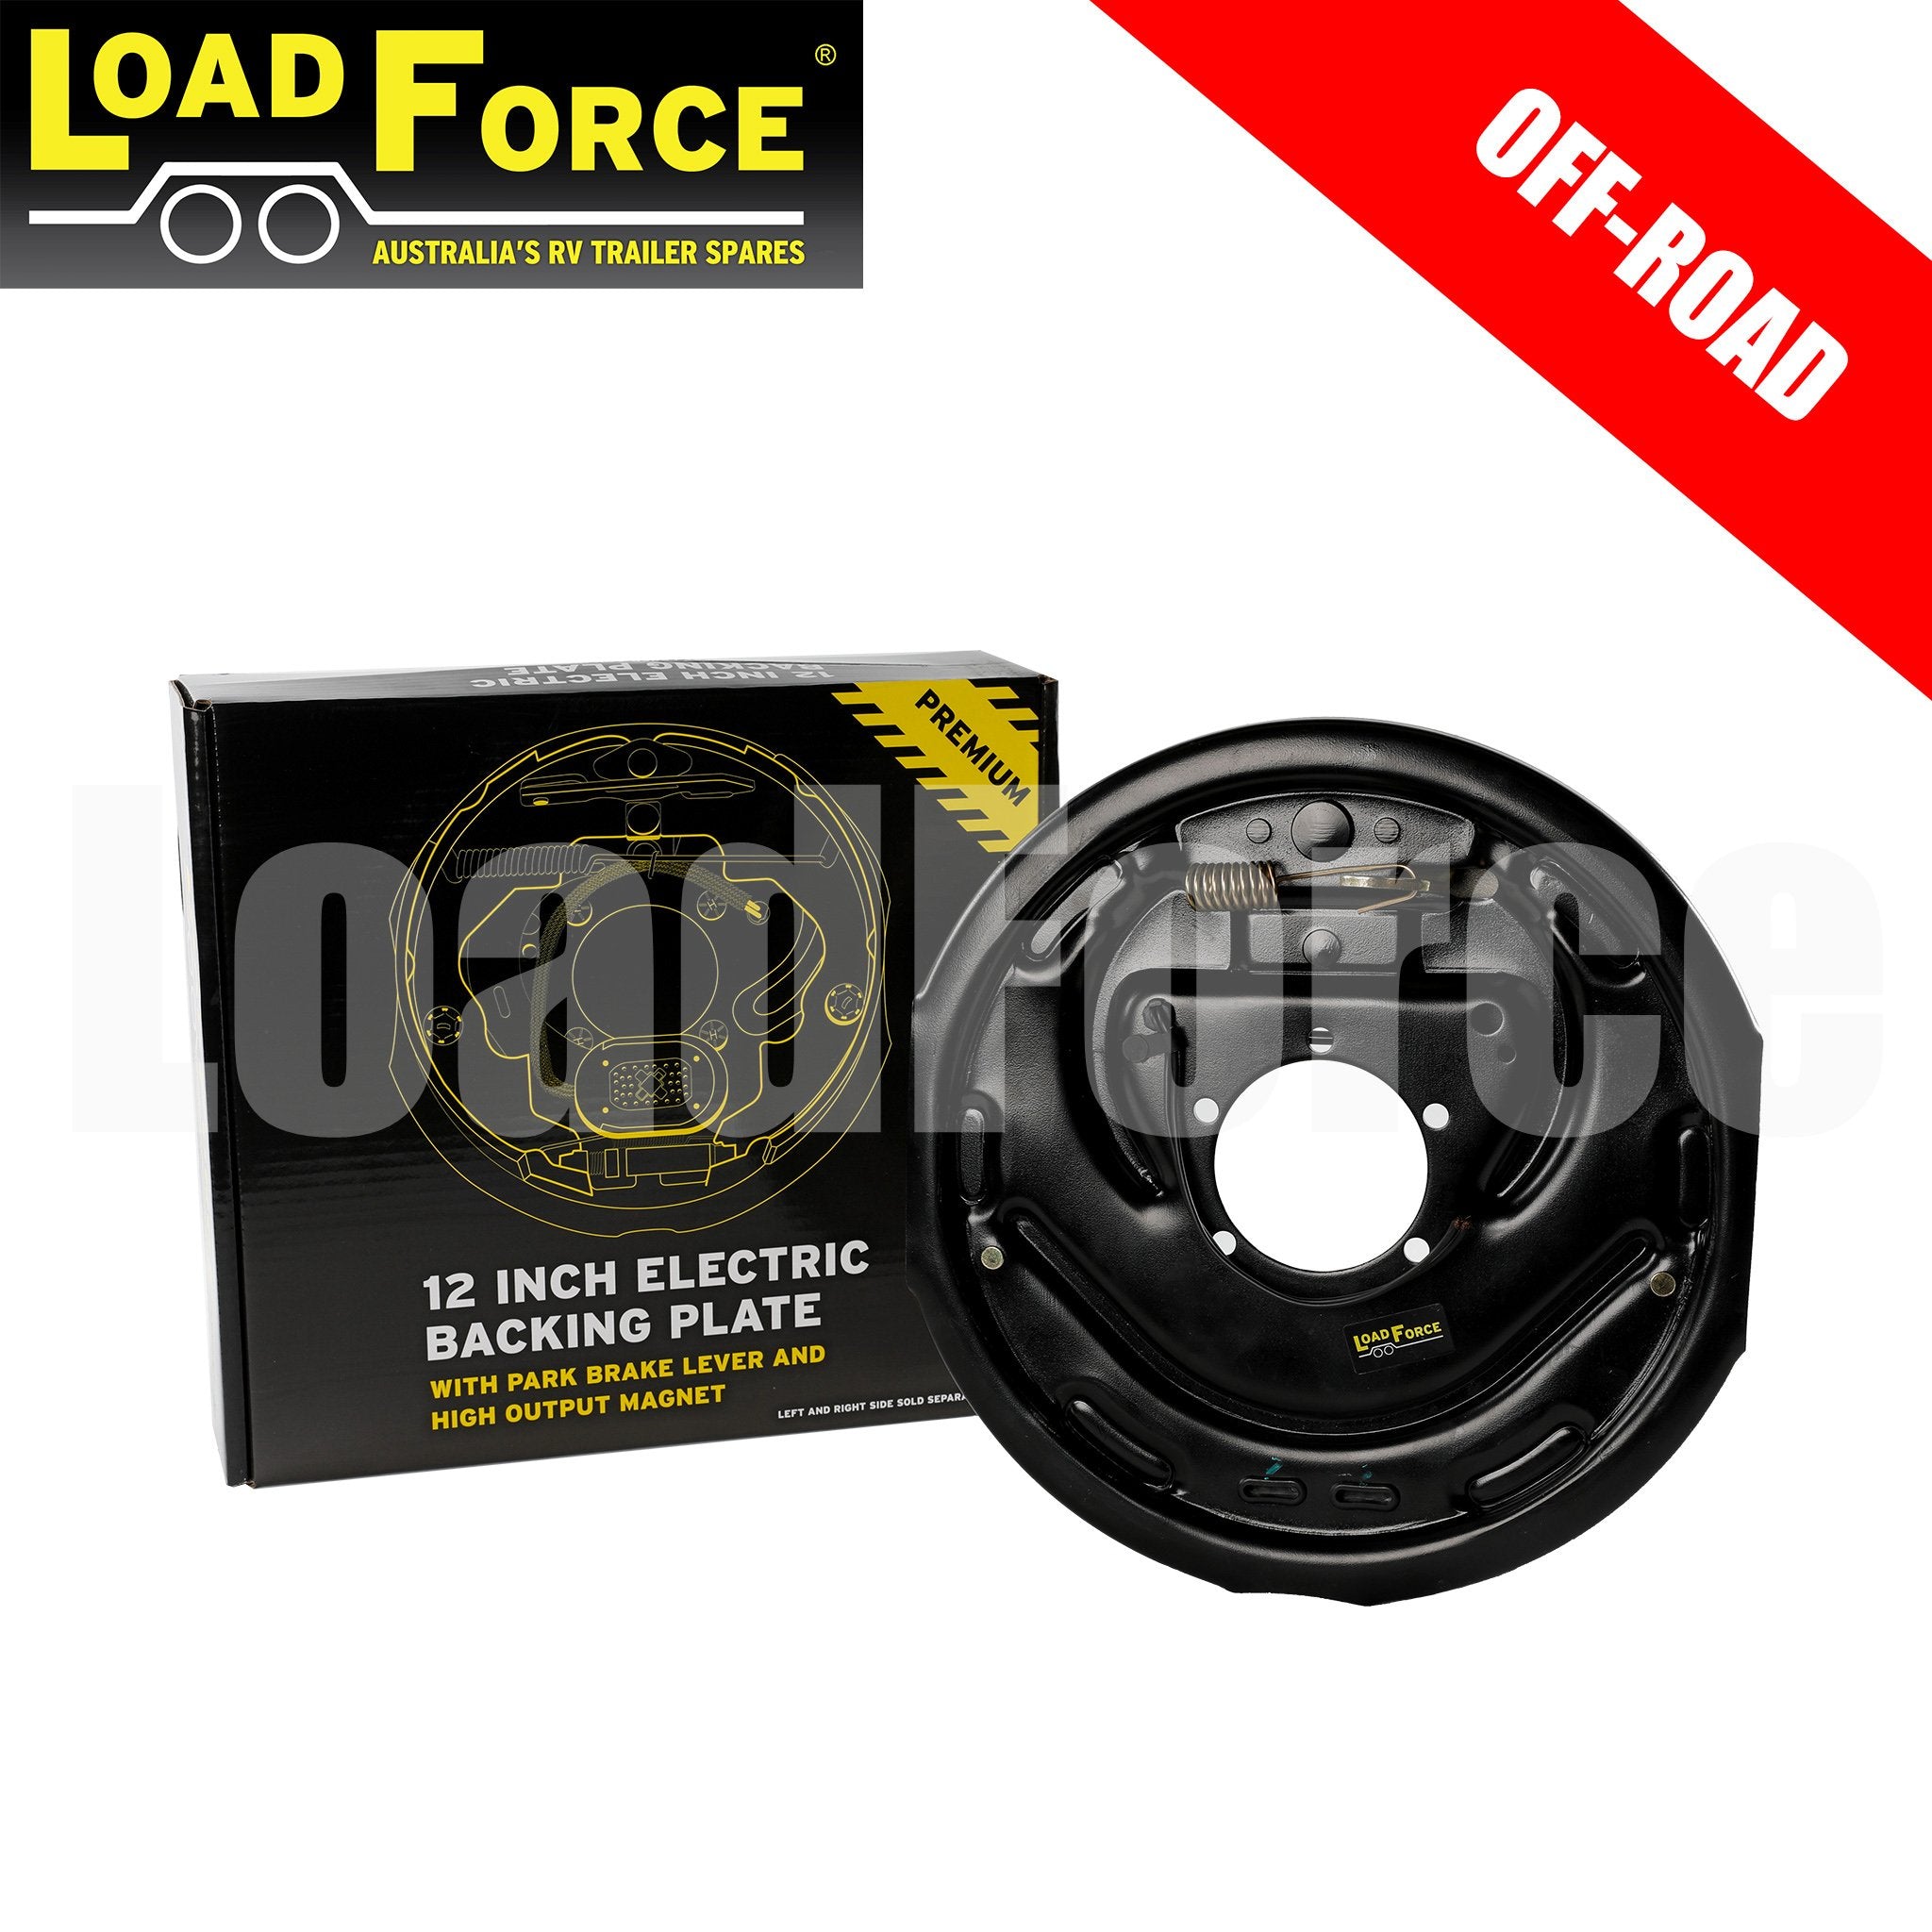 LoadForce 12 inch Off Road Electric Backing Plate Assembly Left Hand